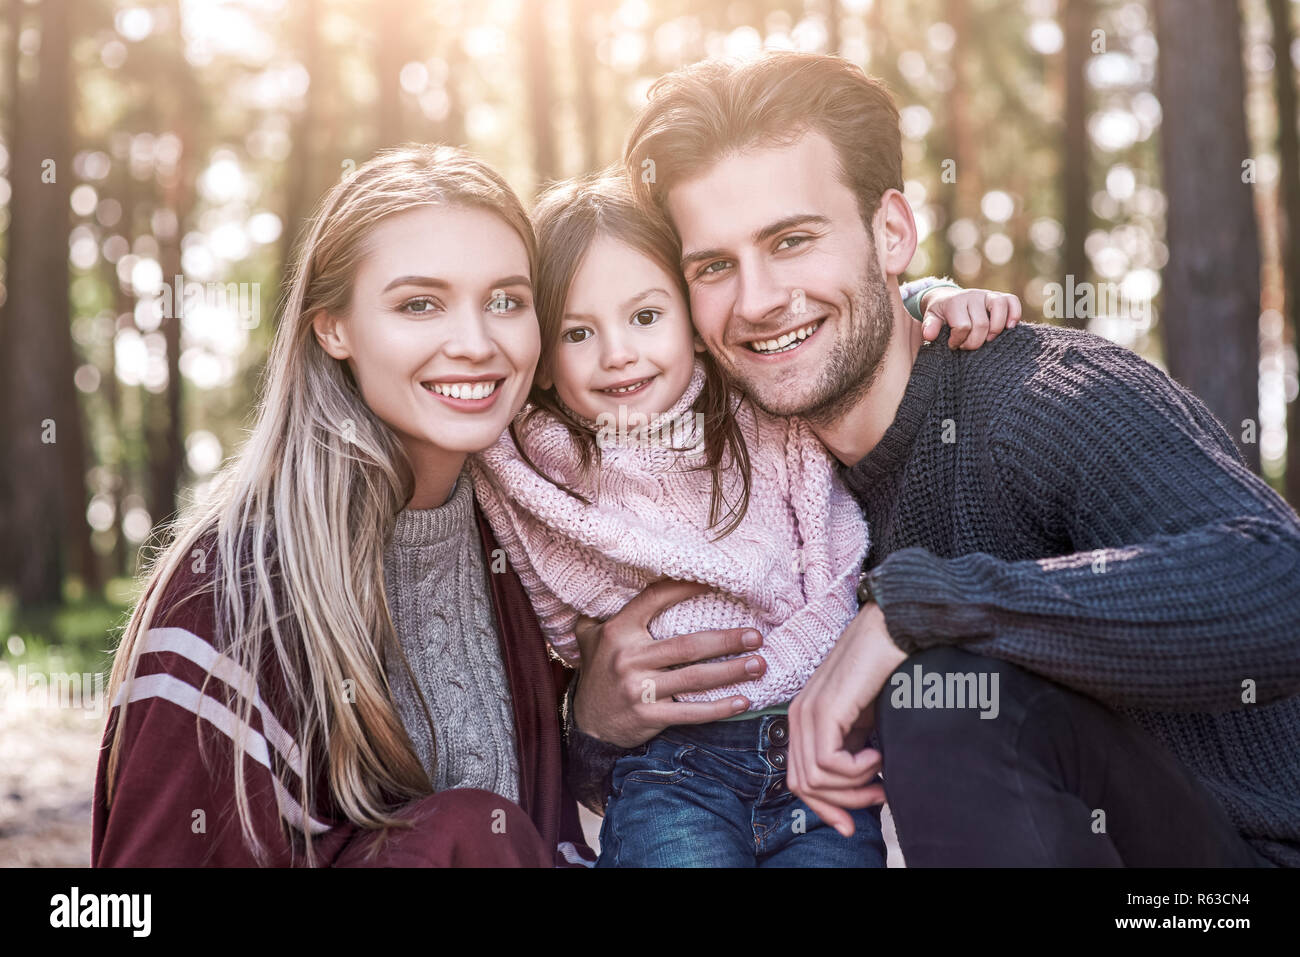 Close-up family portrait in forest, natural background Stock Photo